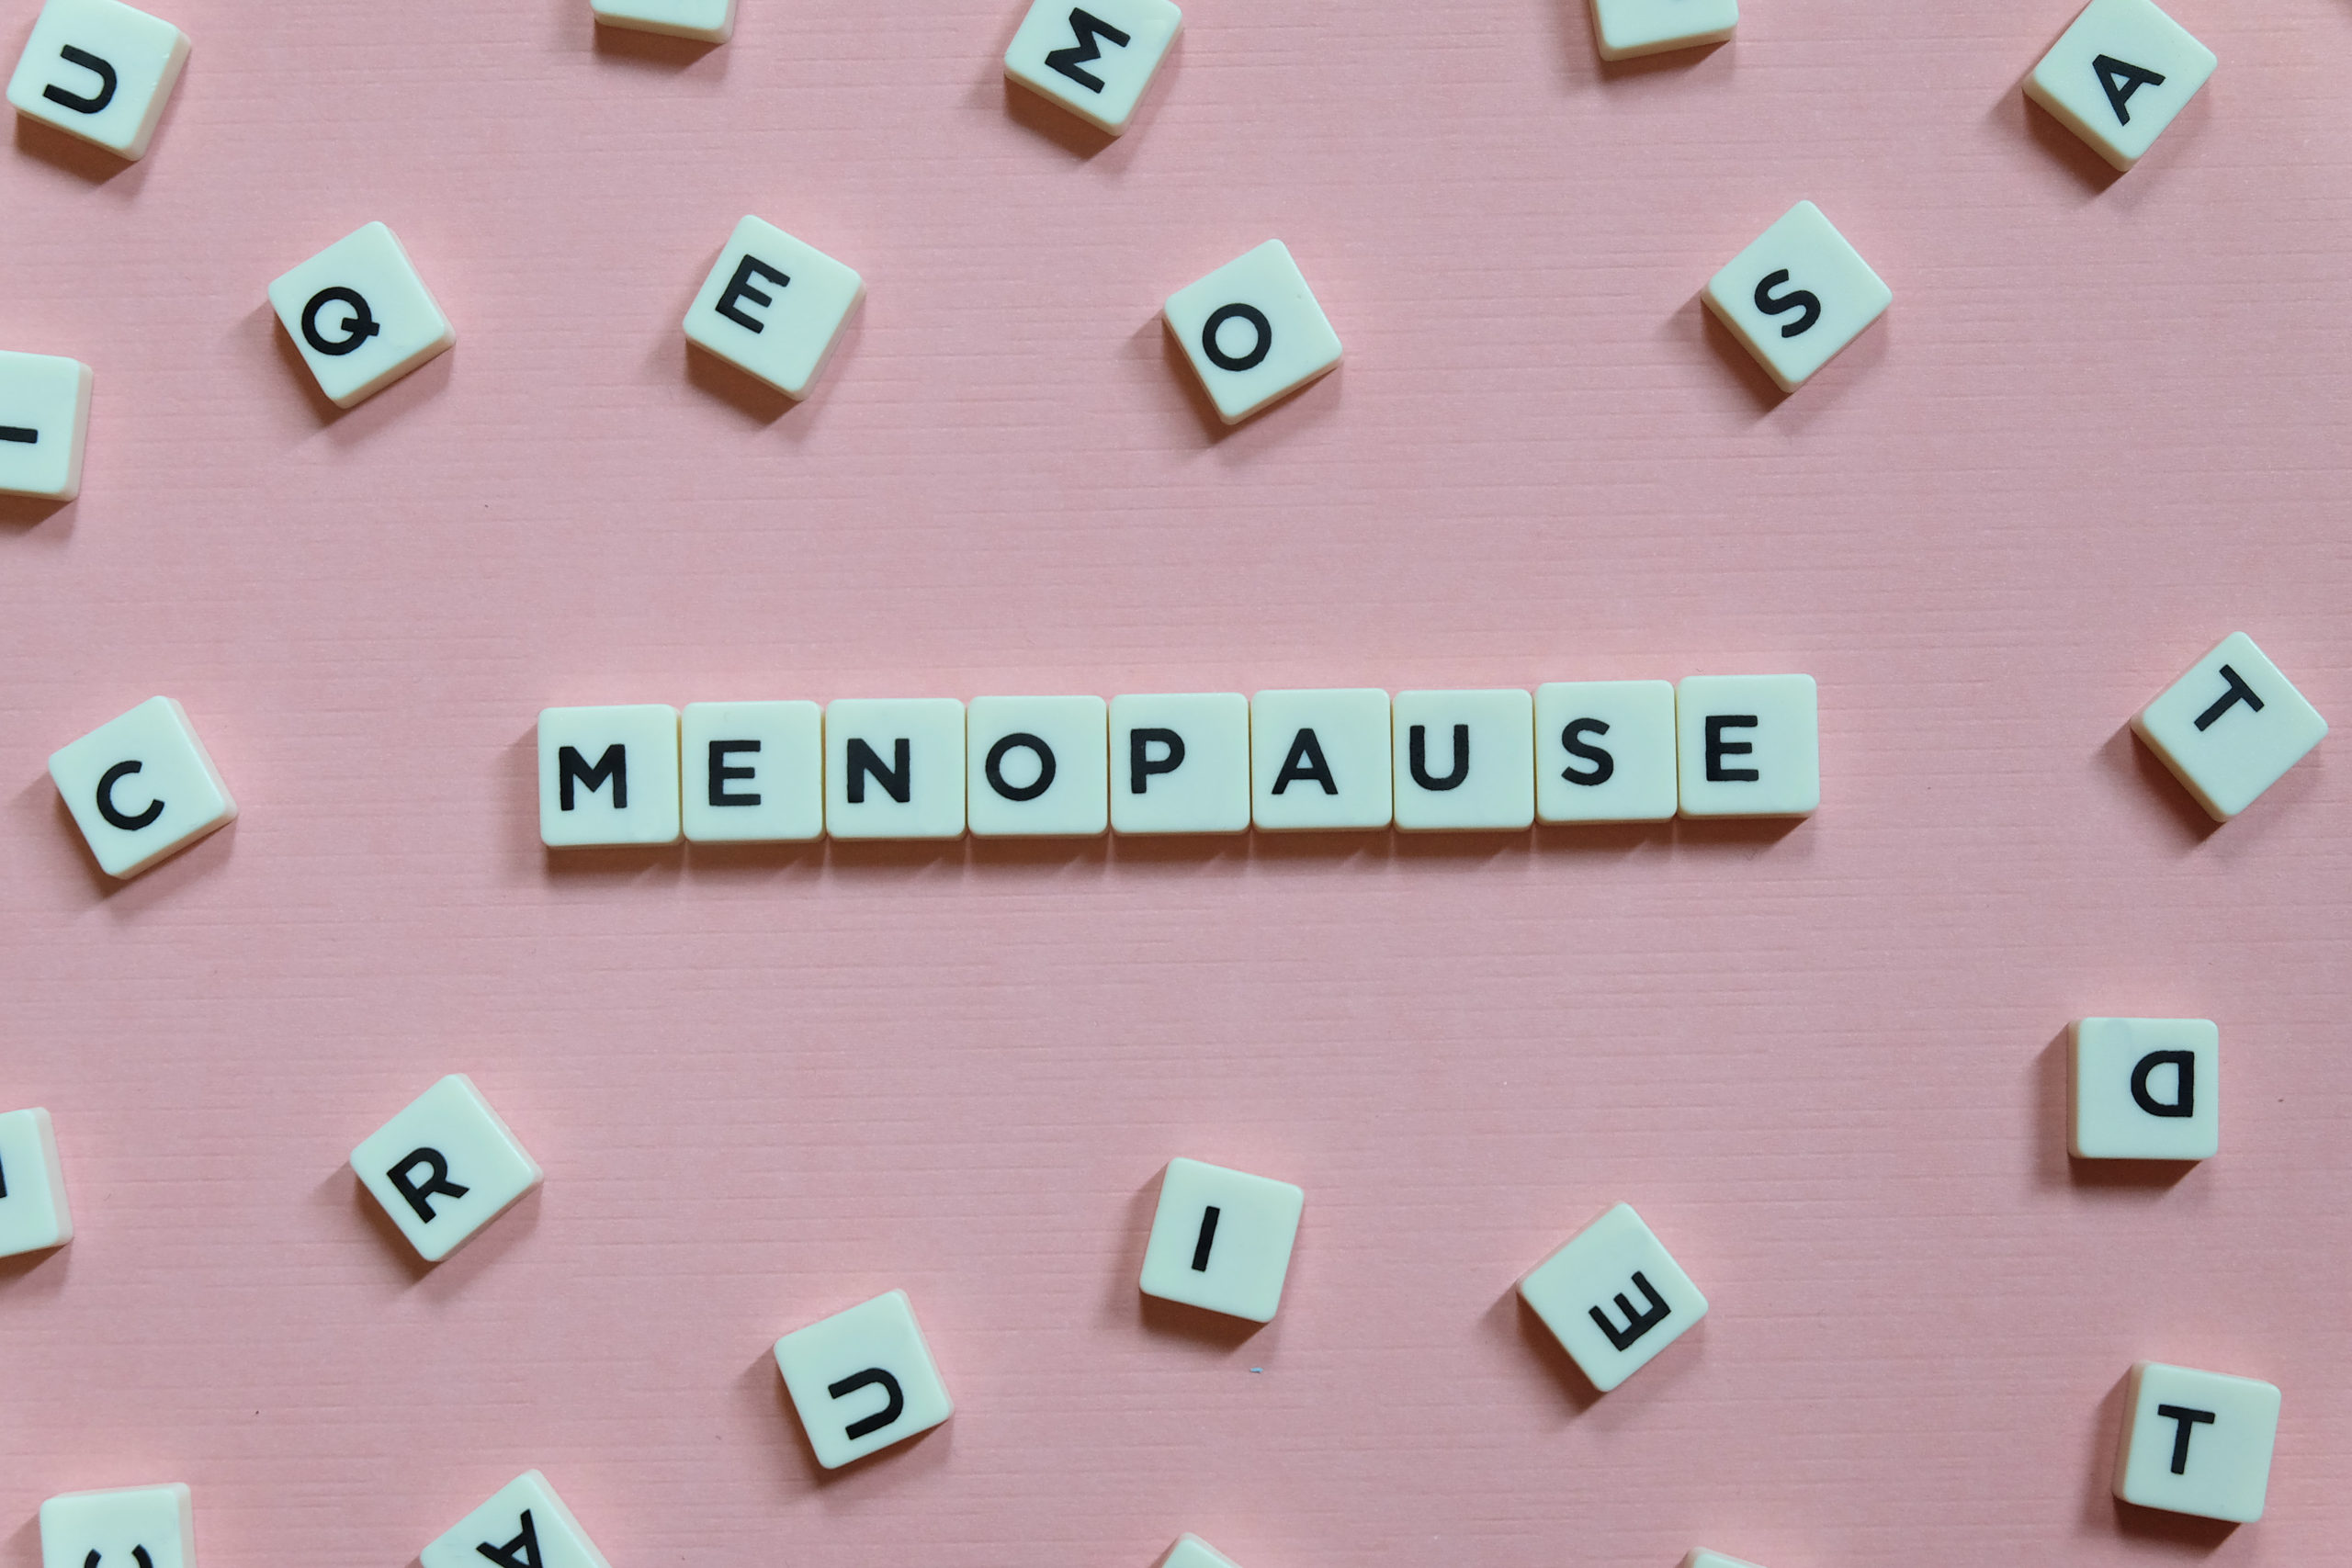 The Menopause at Work